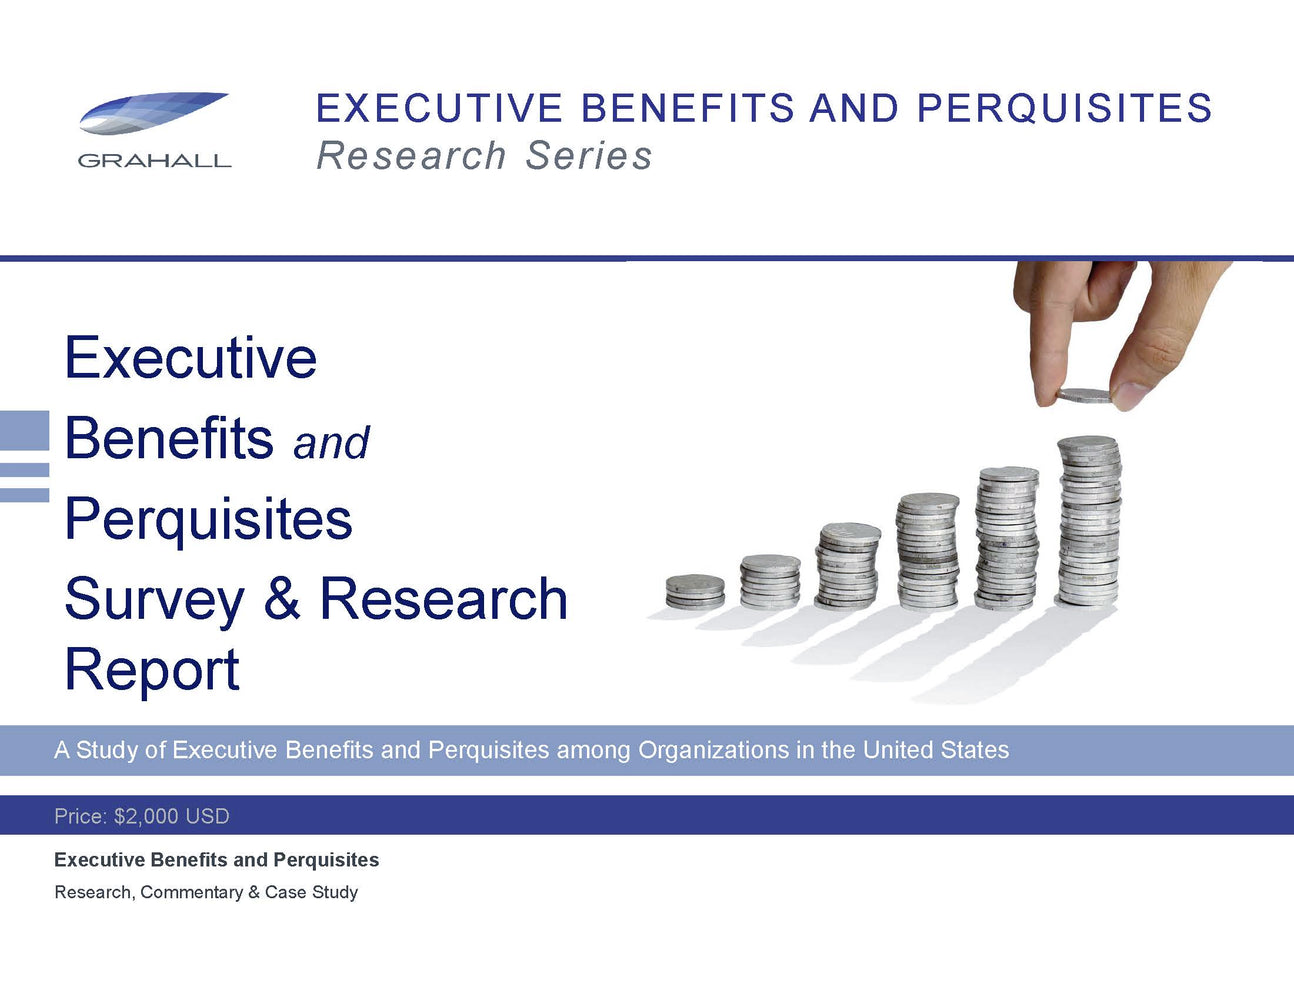 Executive Benefits and Perquisites Survey & Research Report